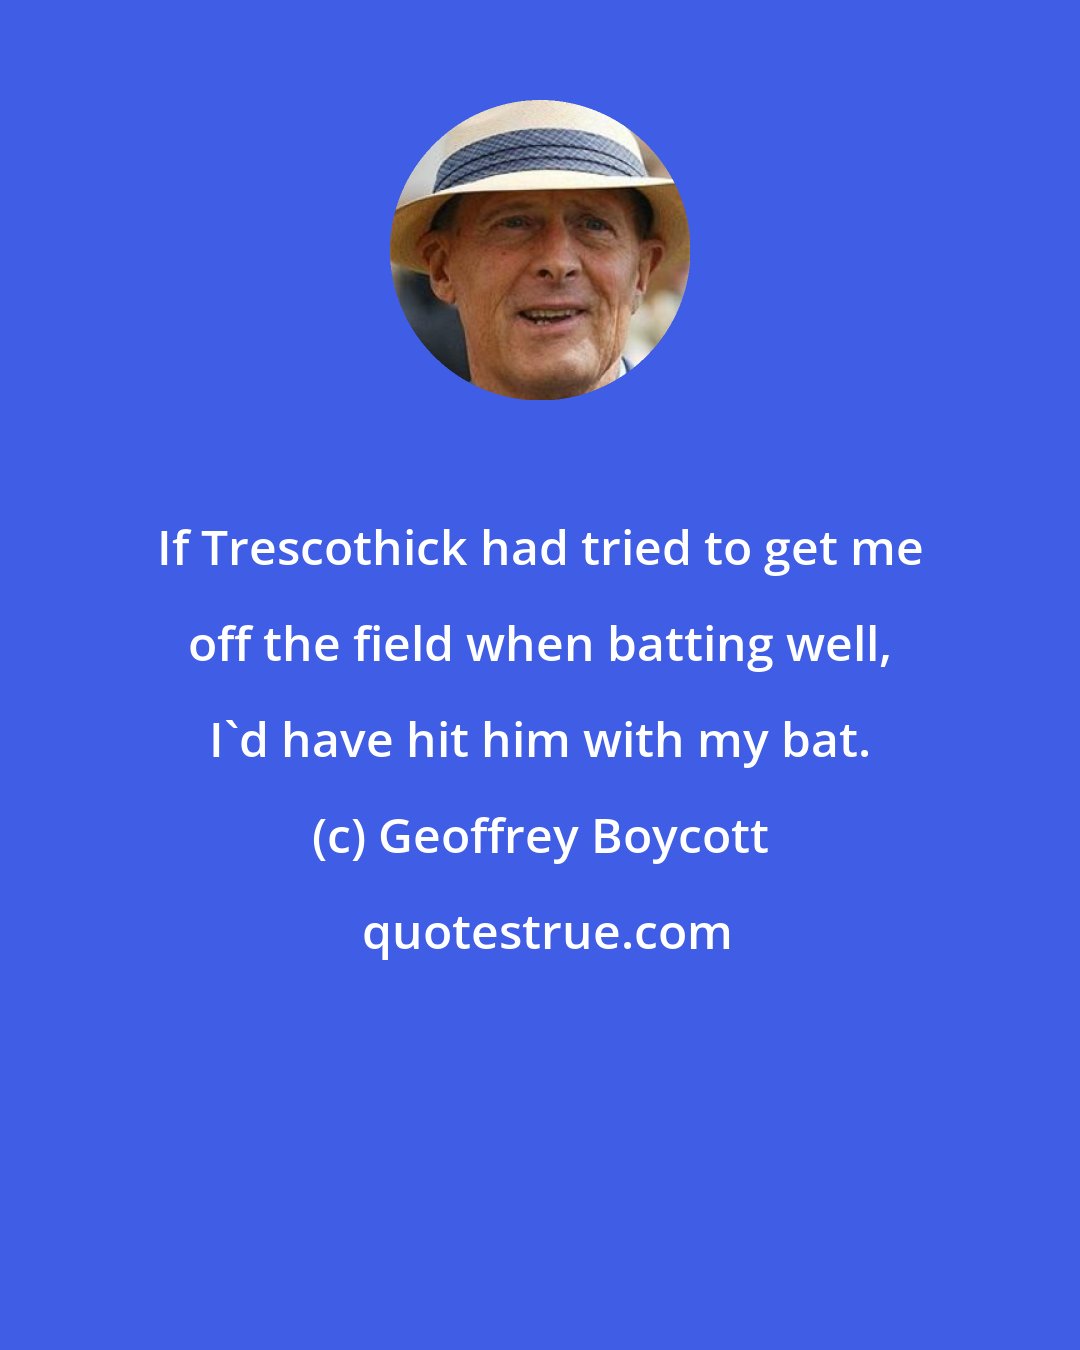 Geoffrey Boycott: If Trescothick had tried to get me off the field when batting well, I'd have hit him with my bat.